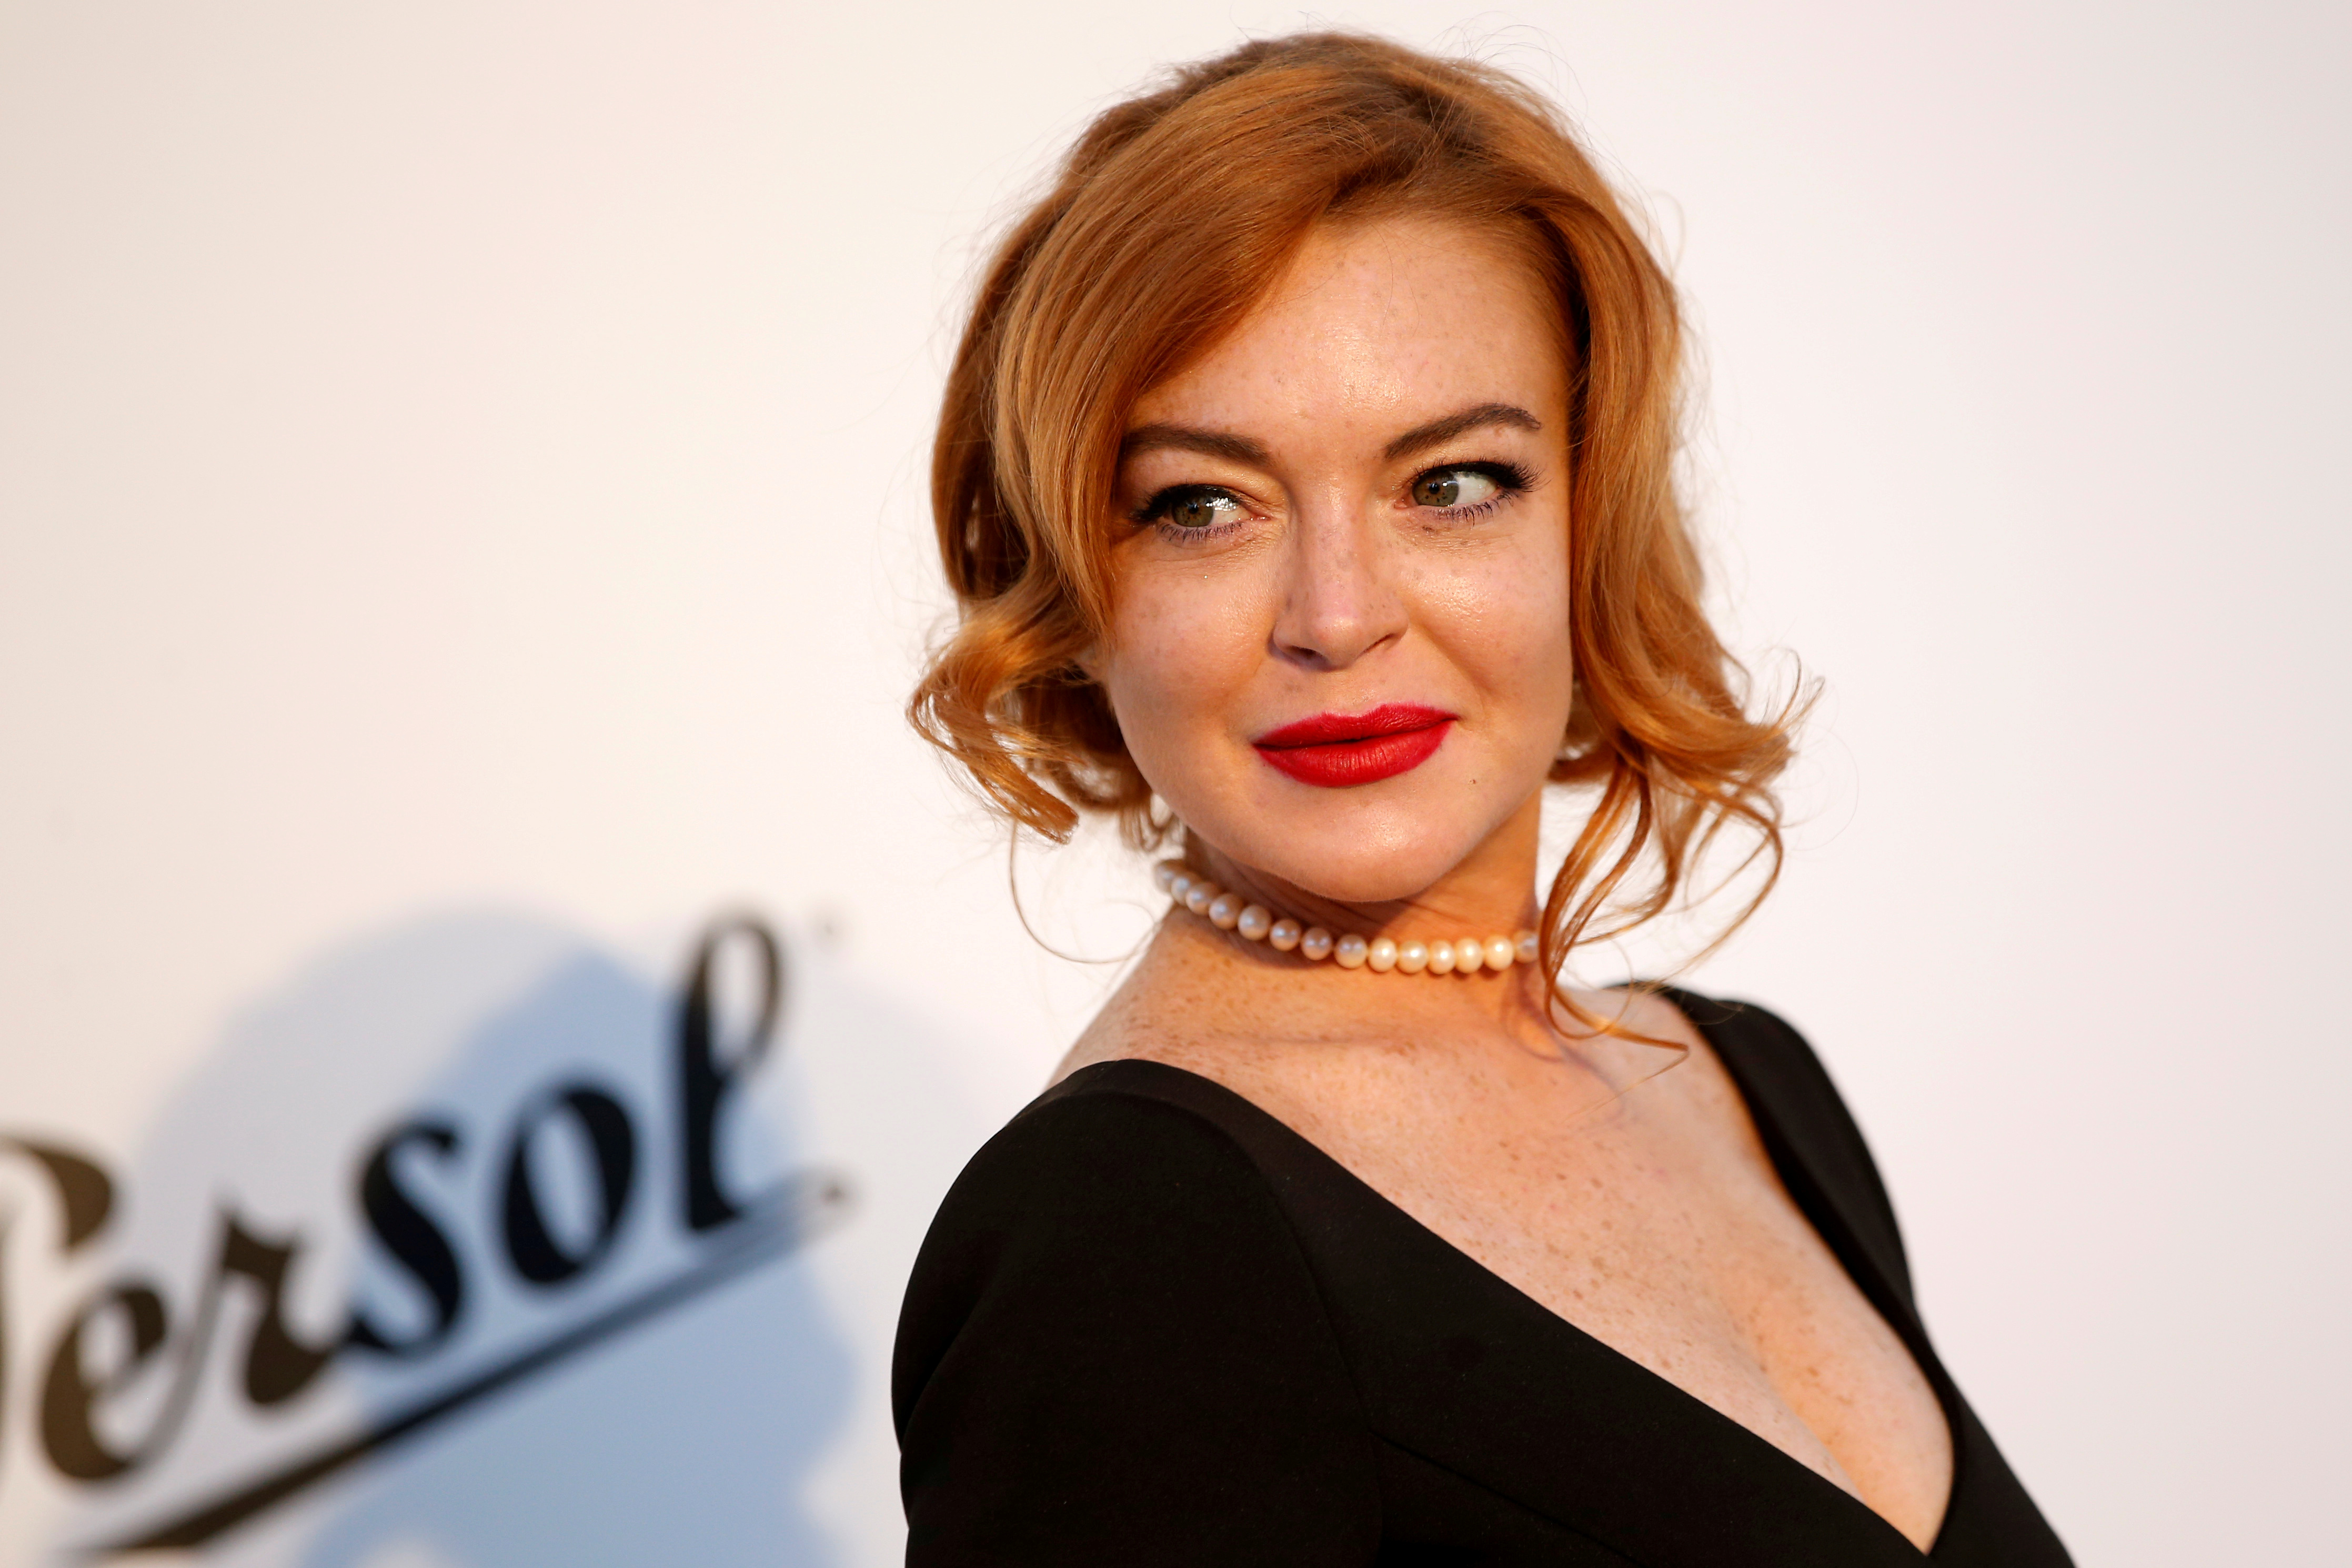   Lindsay Lohan will be the partner of Chord Overstreet in "Falling for Christmas".  (REUTERS)